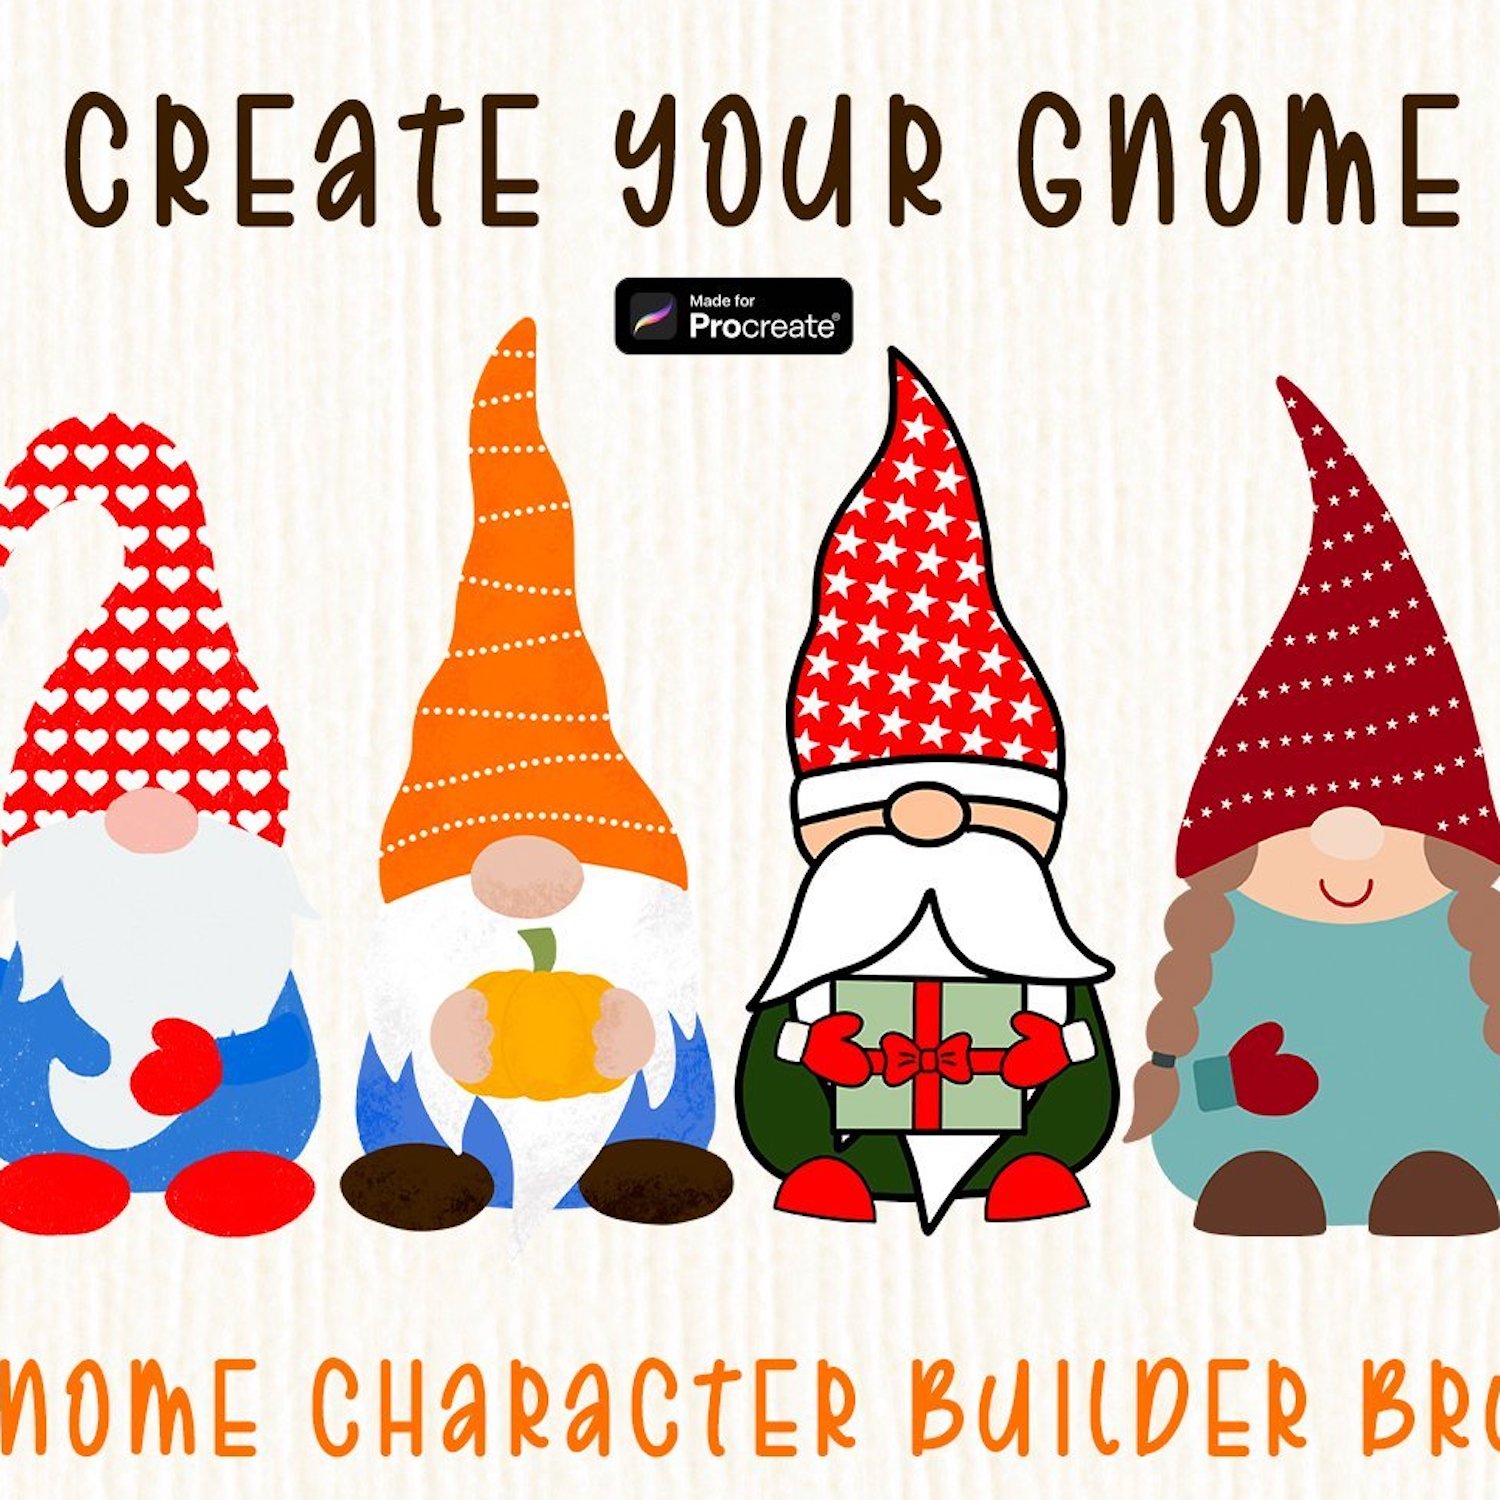 Gnome Creator Brushes for Procreate cover preview image.